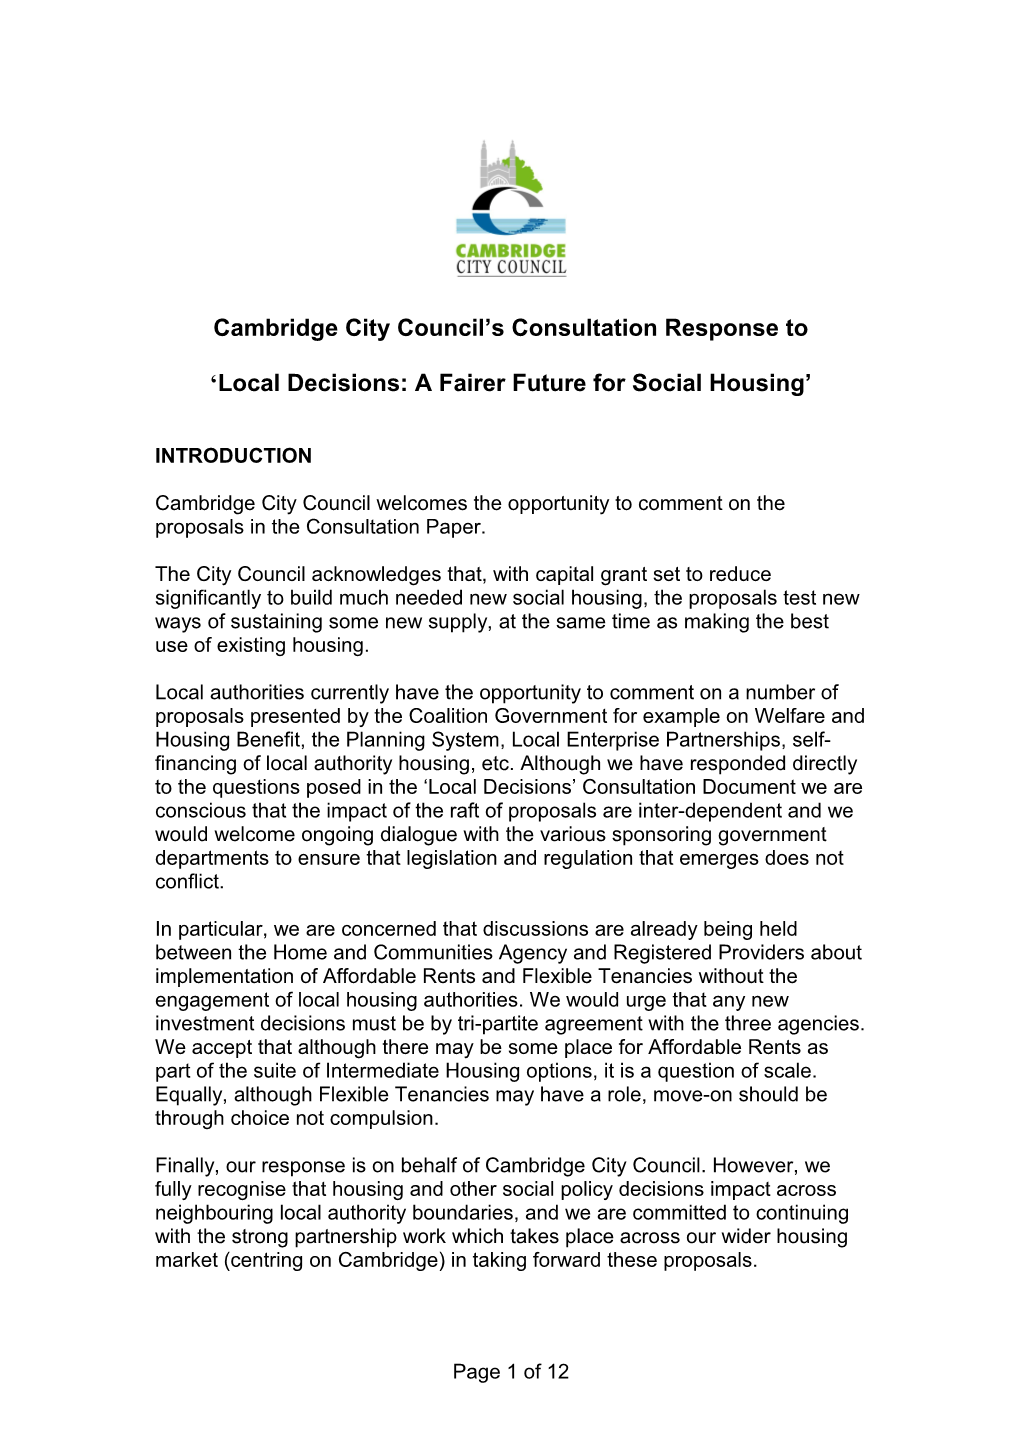 Local Decisions: a Fairer Future for Social Housing